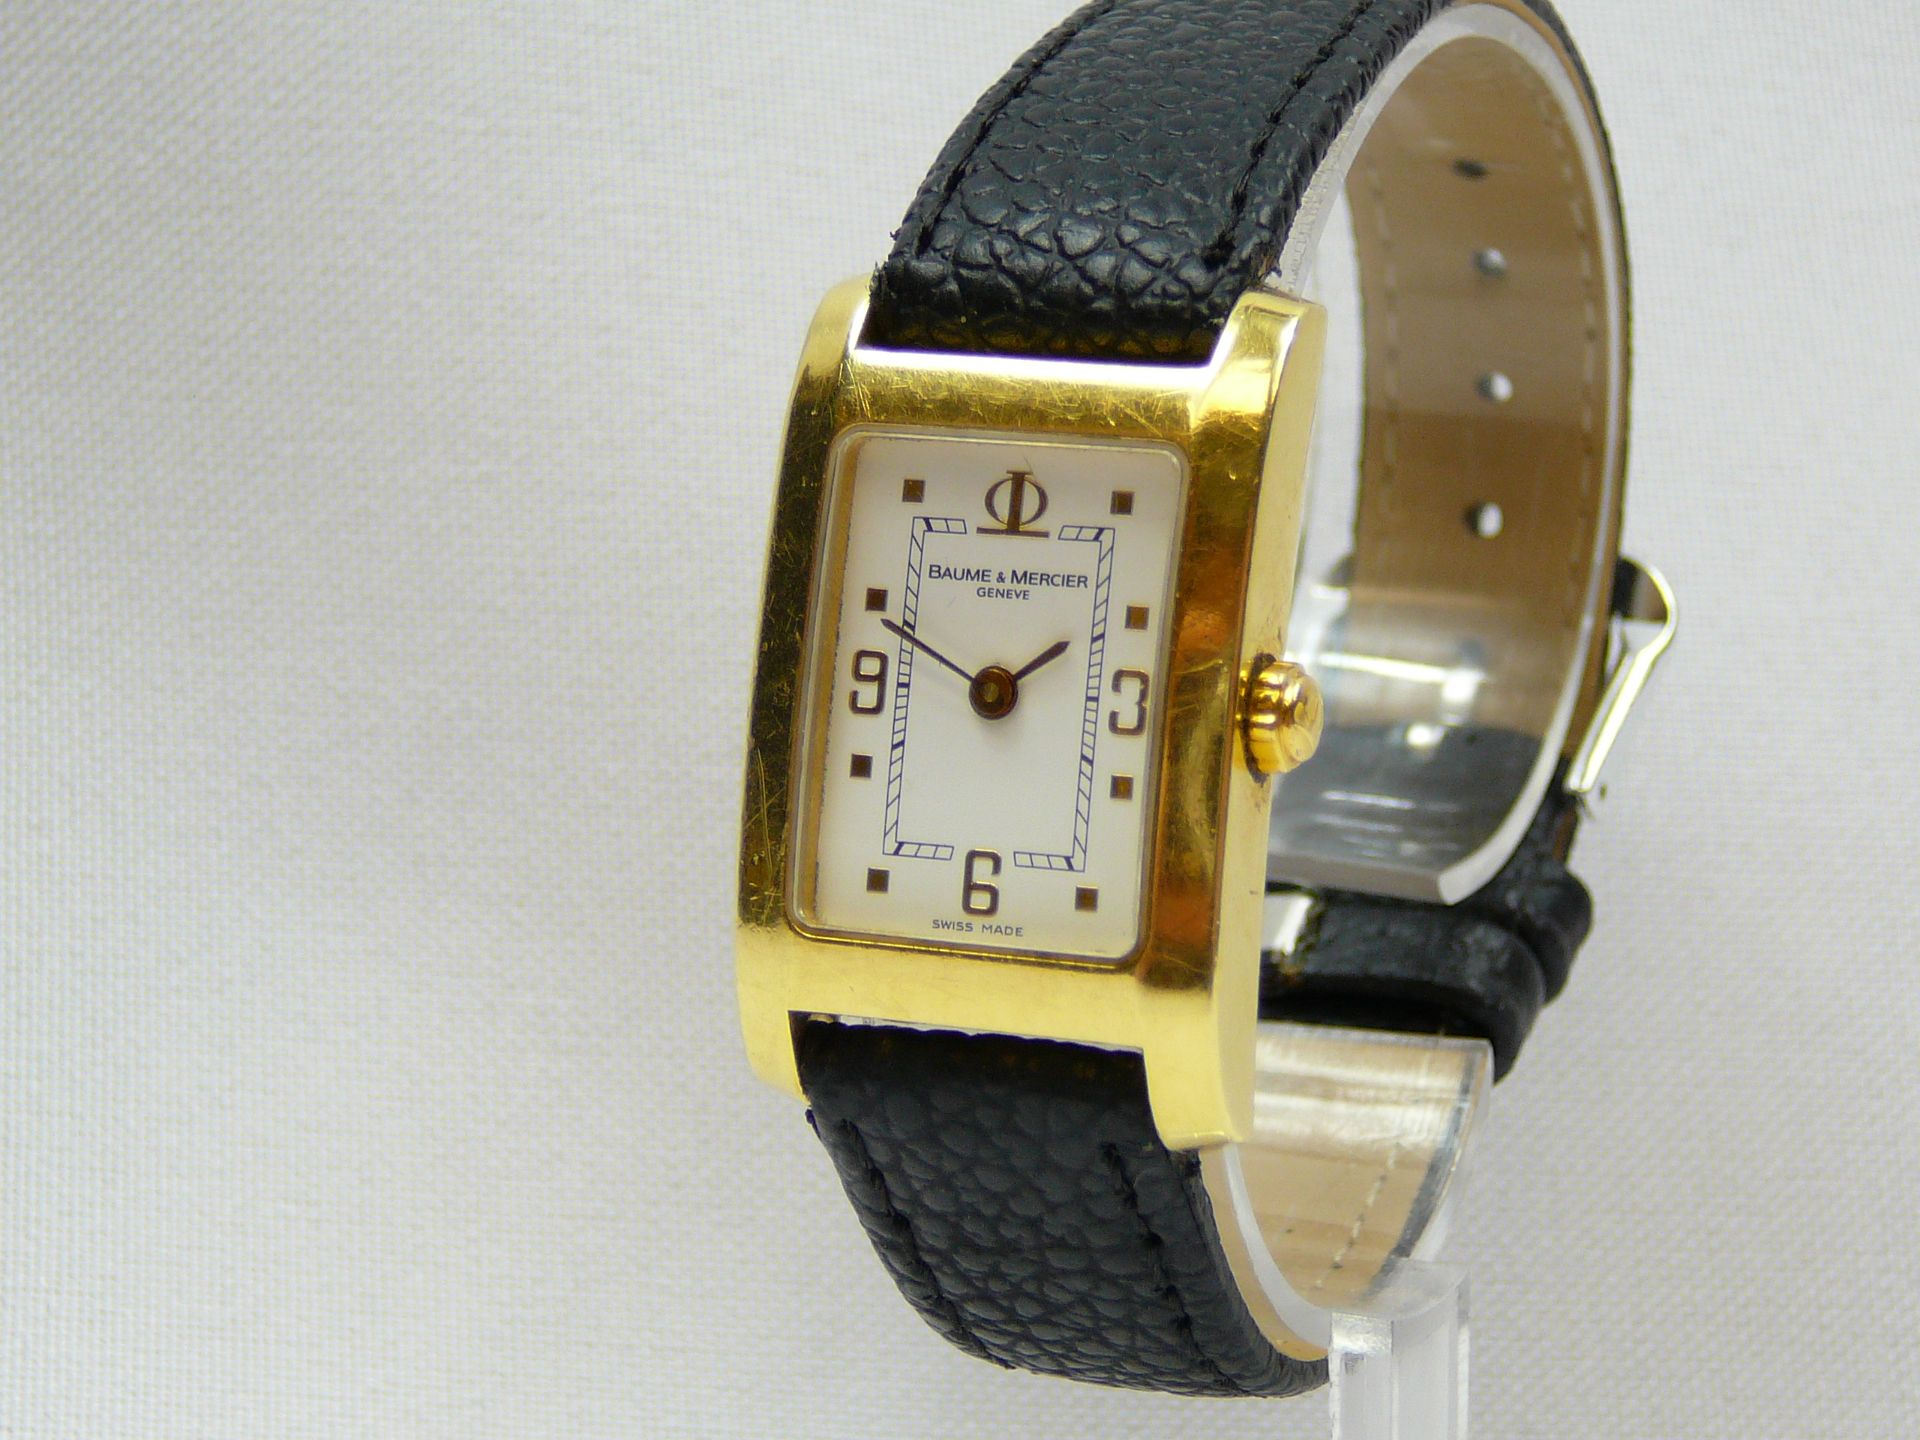 Ladies Gold Baume and Mercier Wristwatch - Image 2 of 3